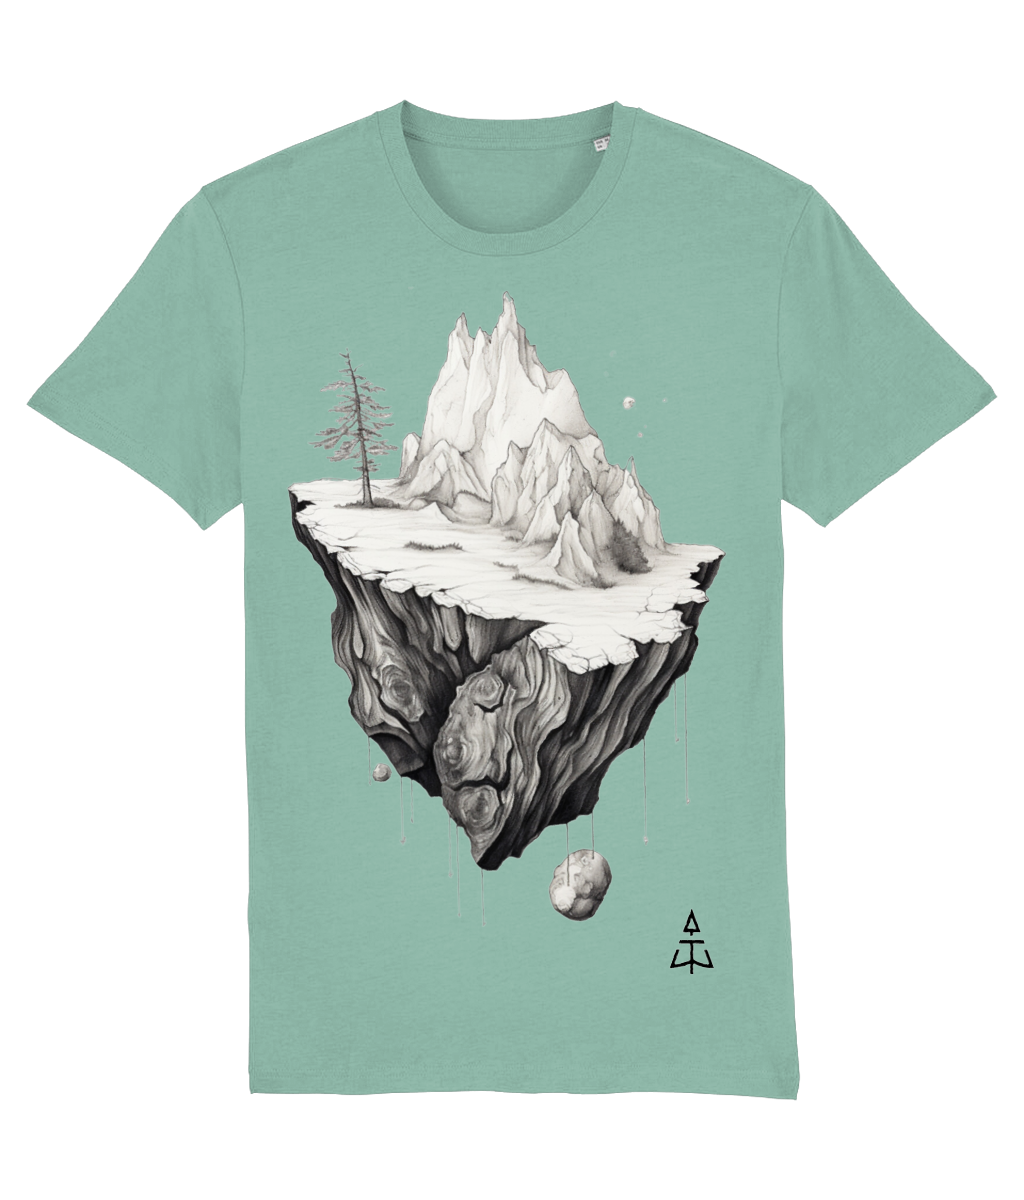 Growing Crystals Graphic Tee